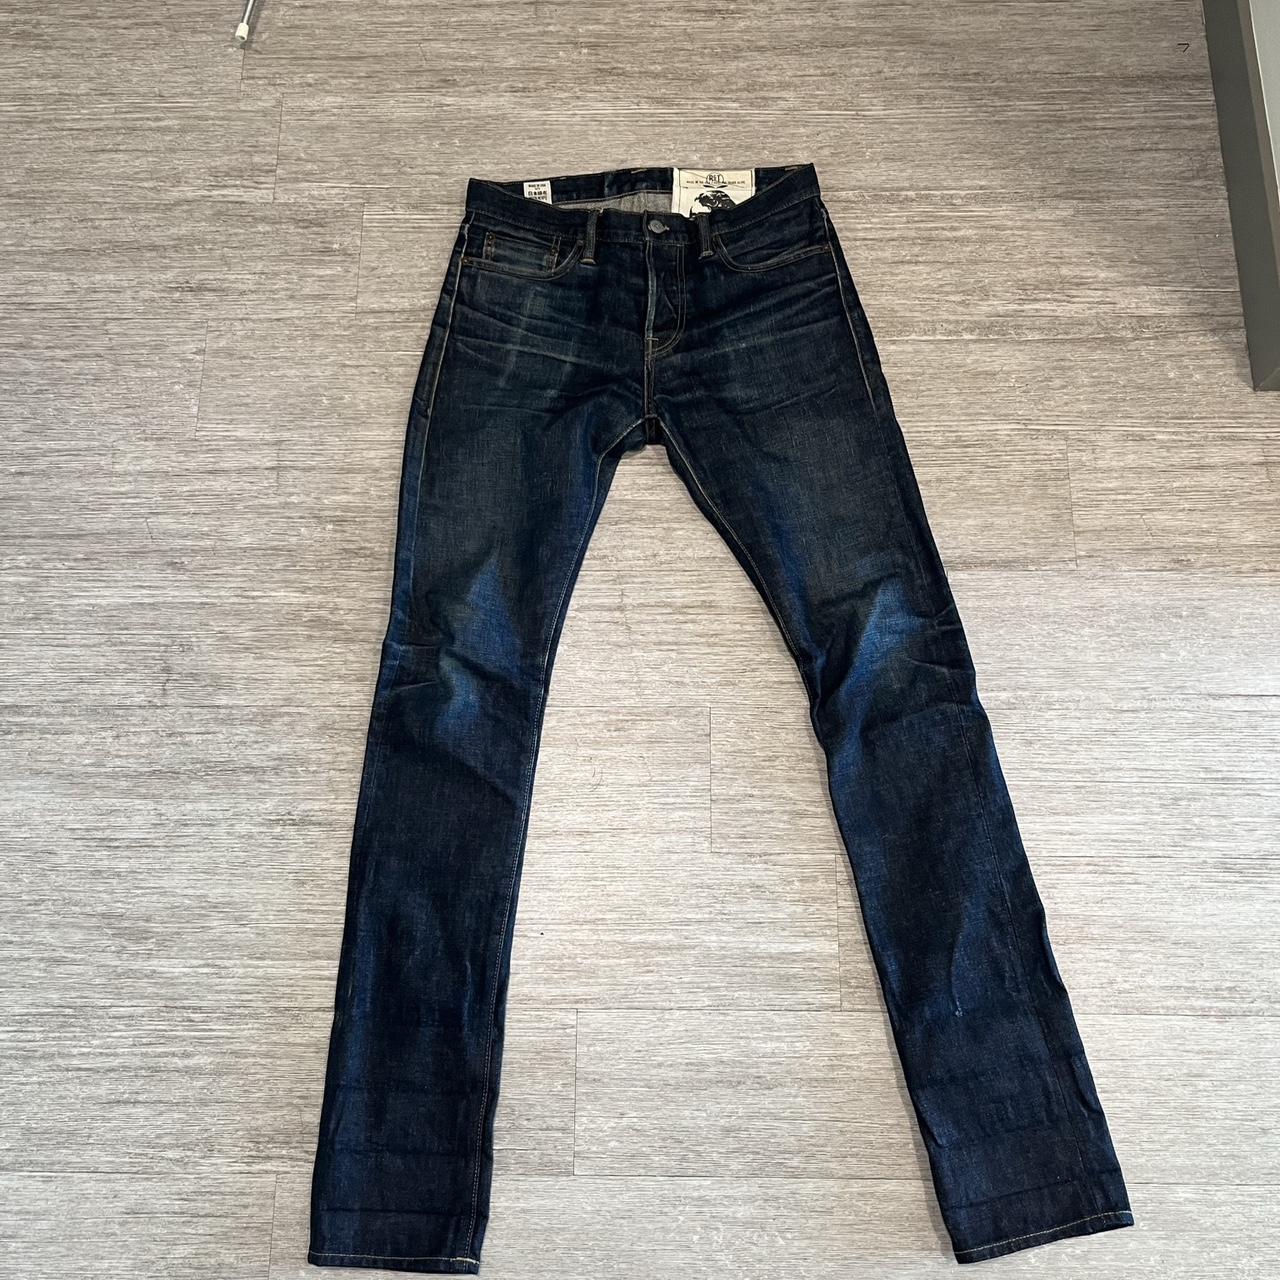 Selvage Denim Size 30 Rogue Territory jeans for... - Depop